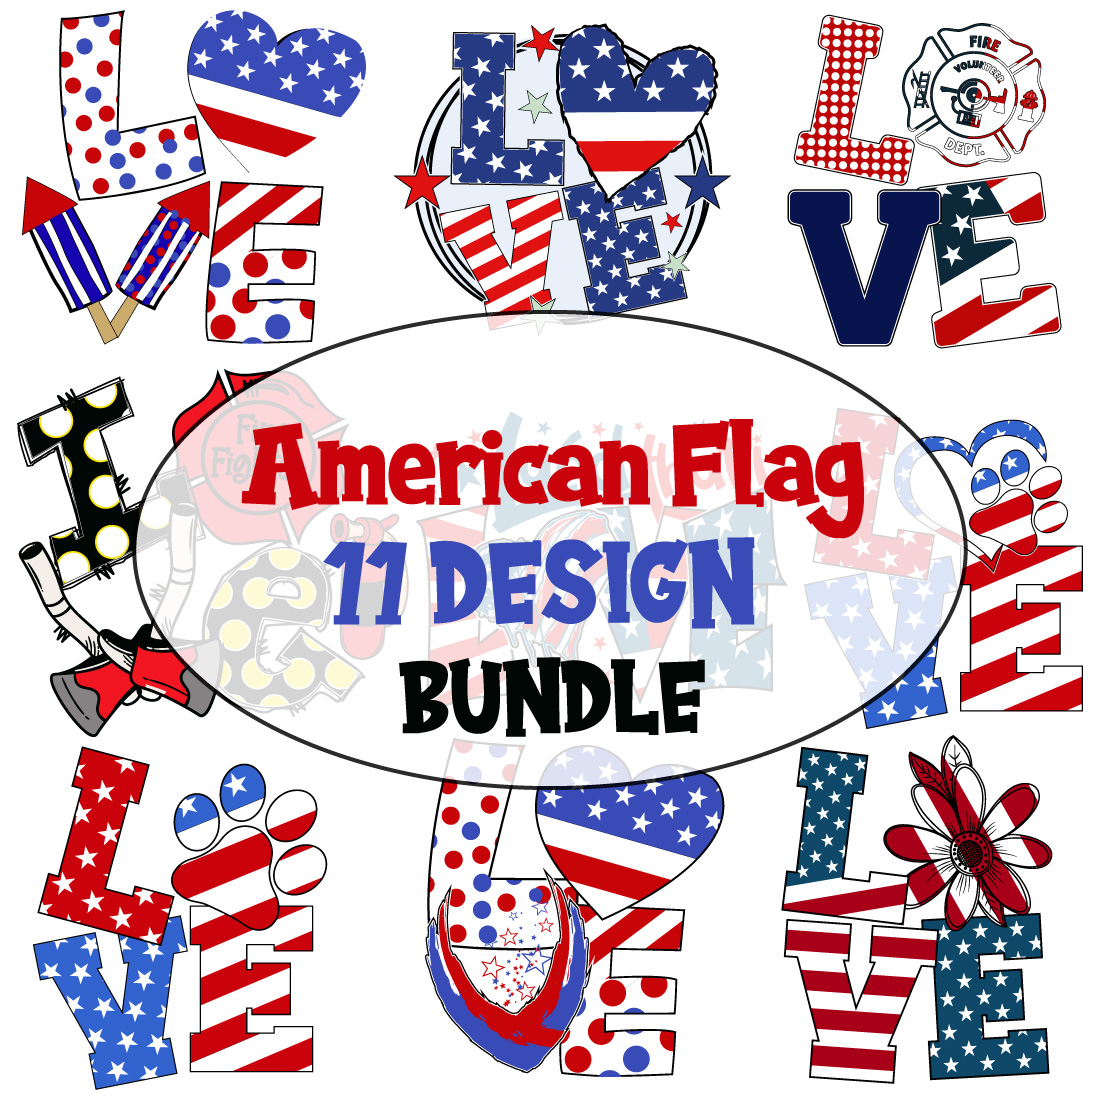 American Flag 4th of July Independence Day T-shirt Bundle cover image.